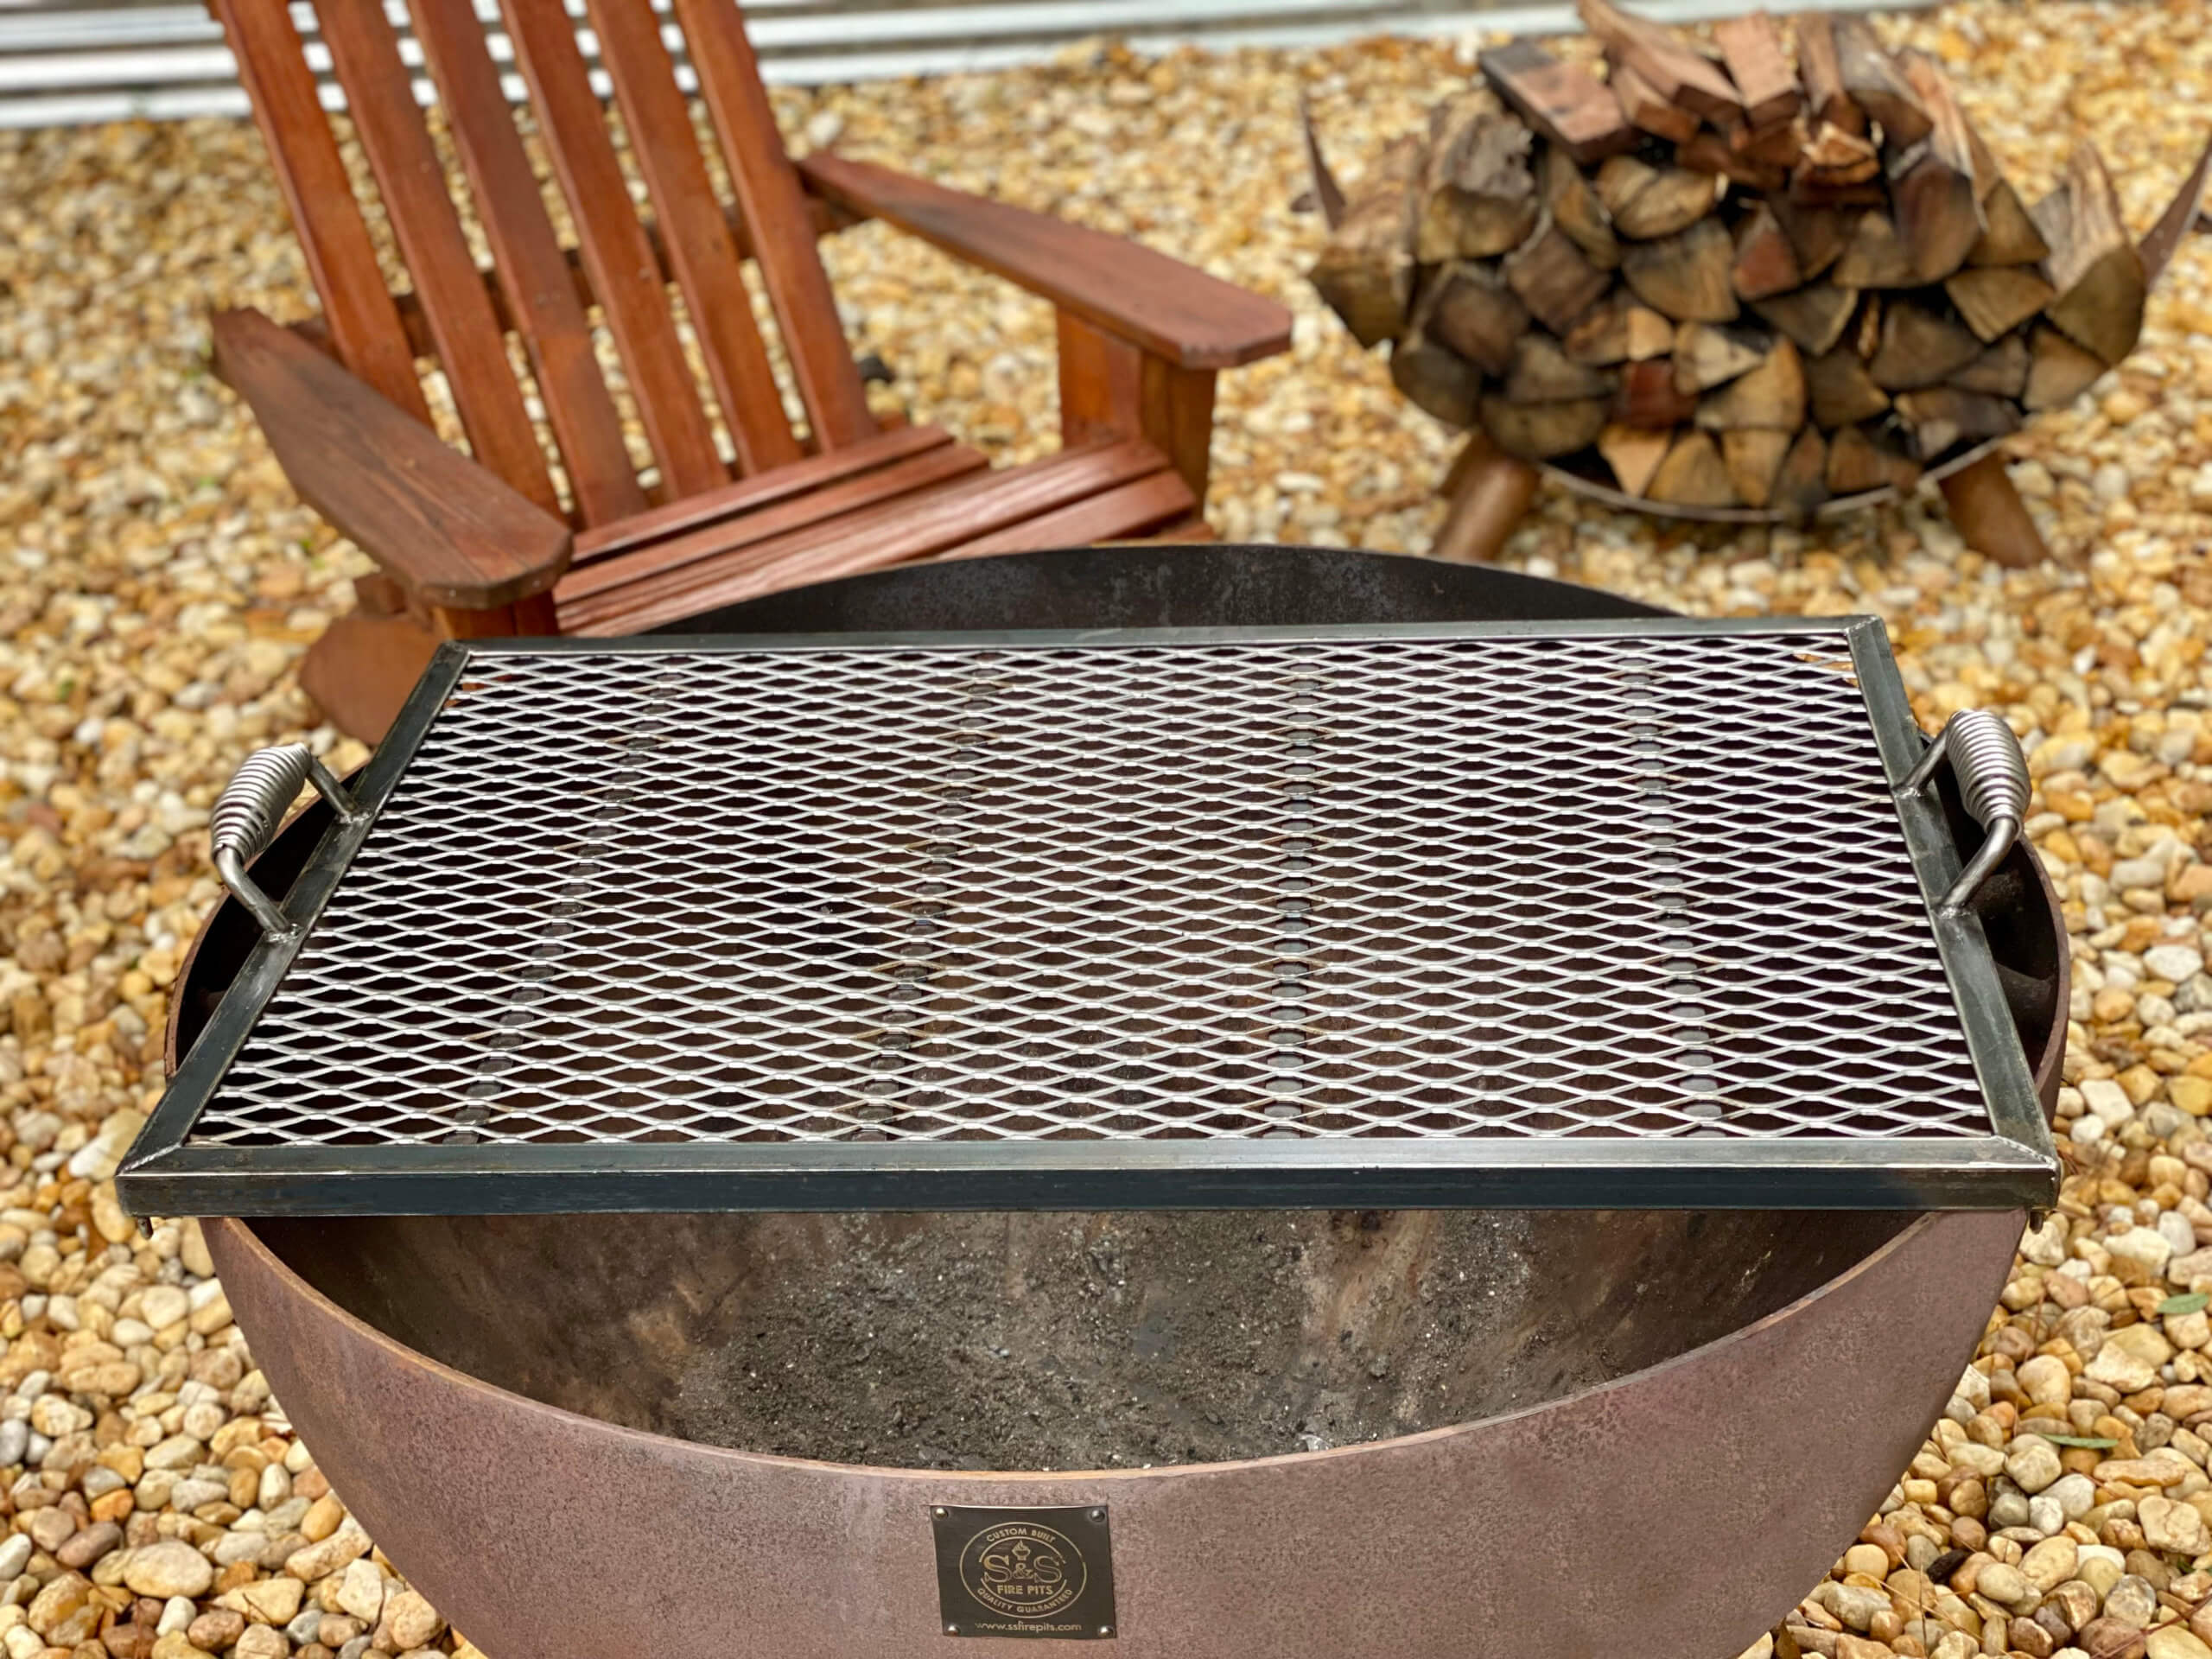 41 Heavy Duty Handcrafted Fire Pit, 30 Inch Fire Pit Cooking Grate